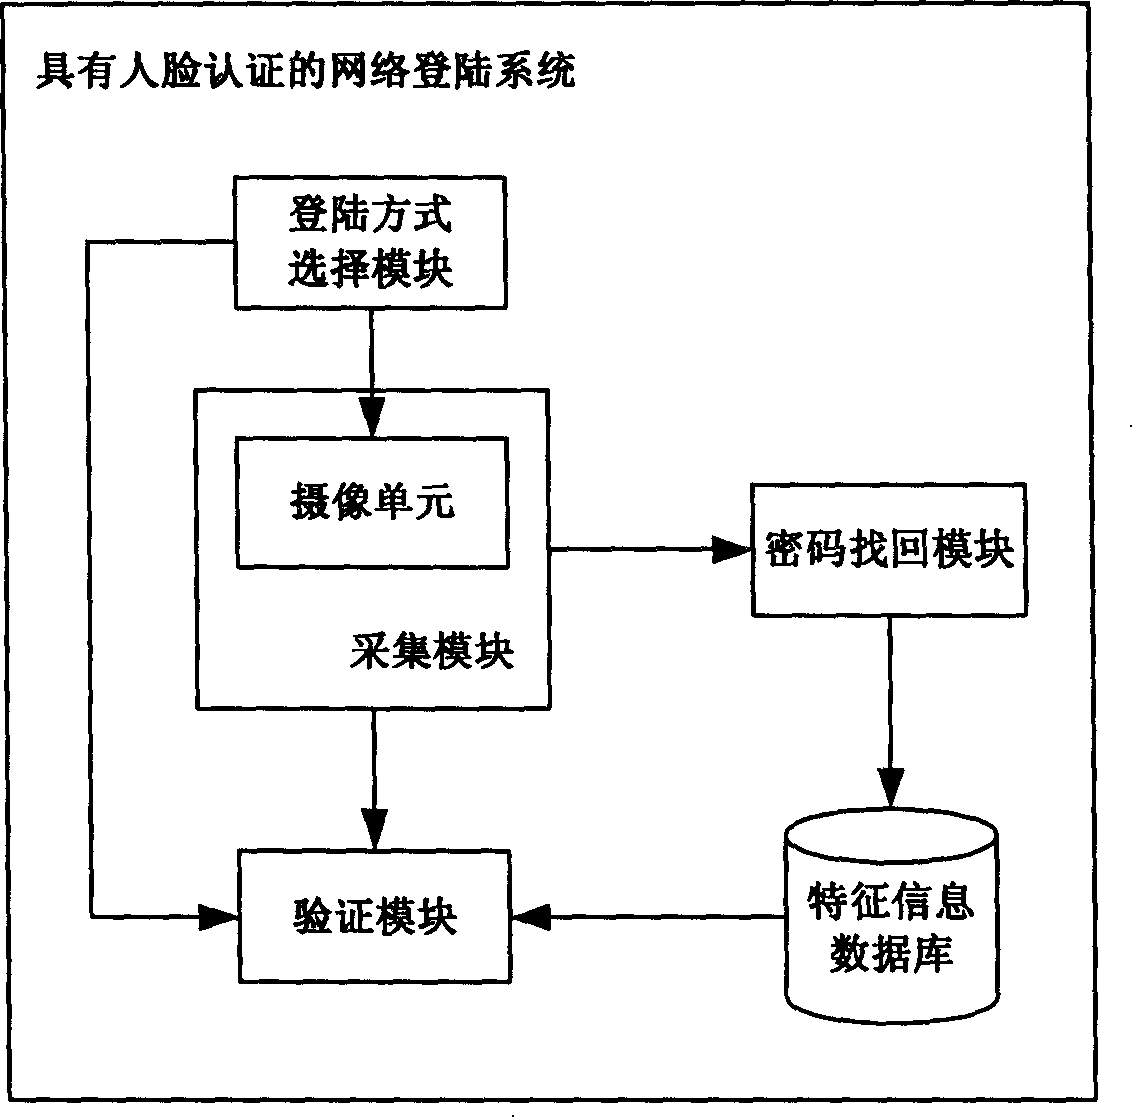 Network login system and method with face authentication